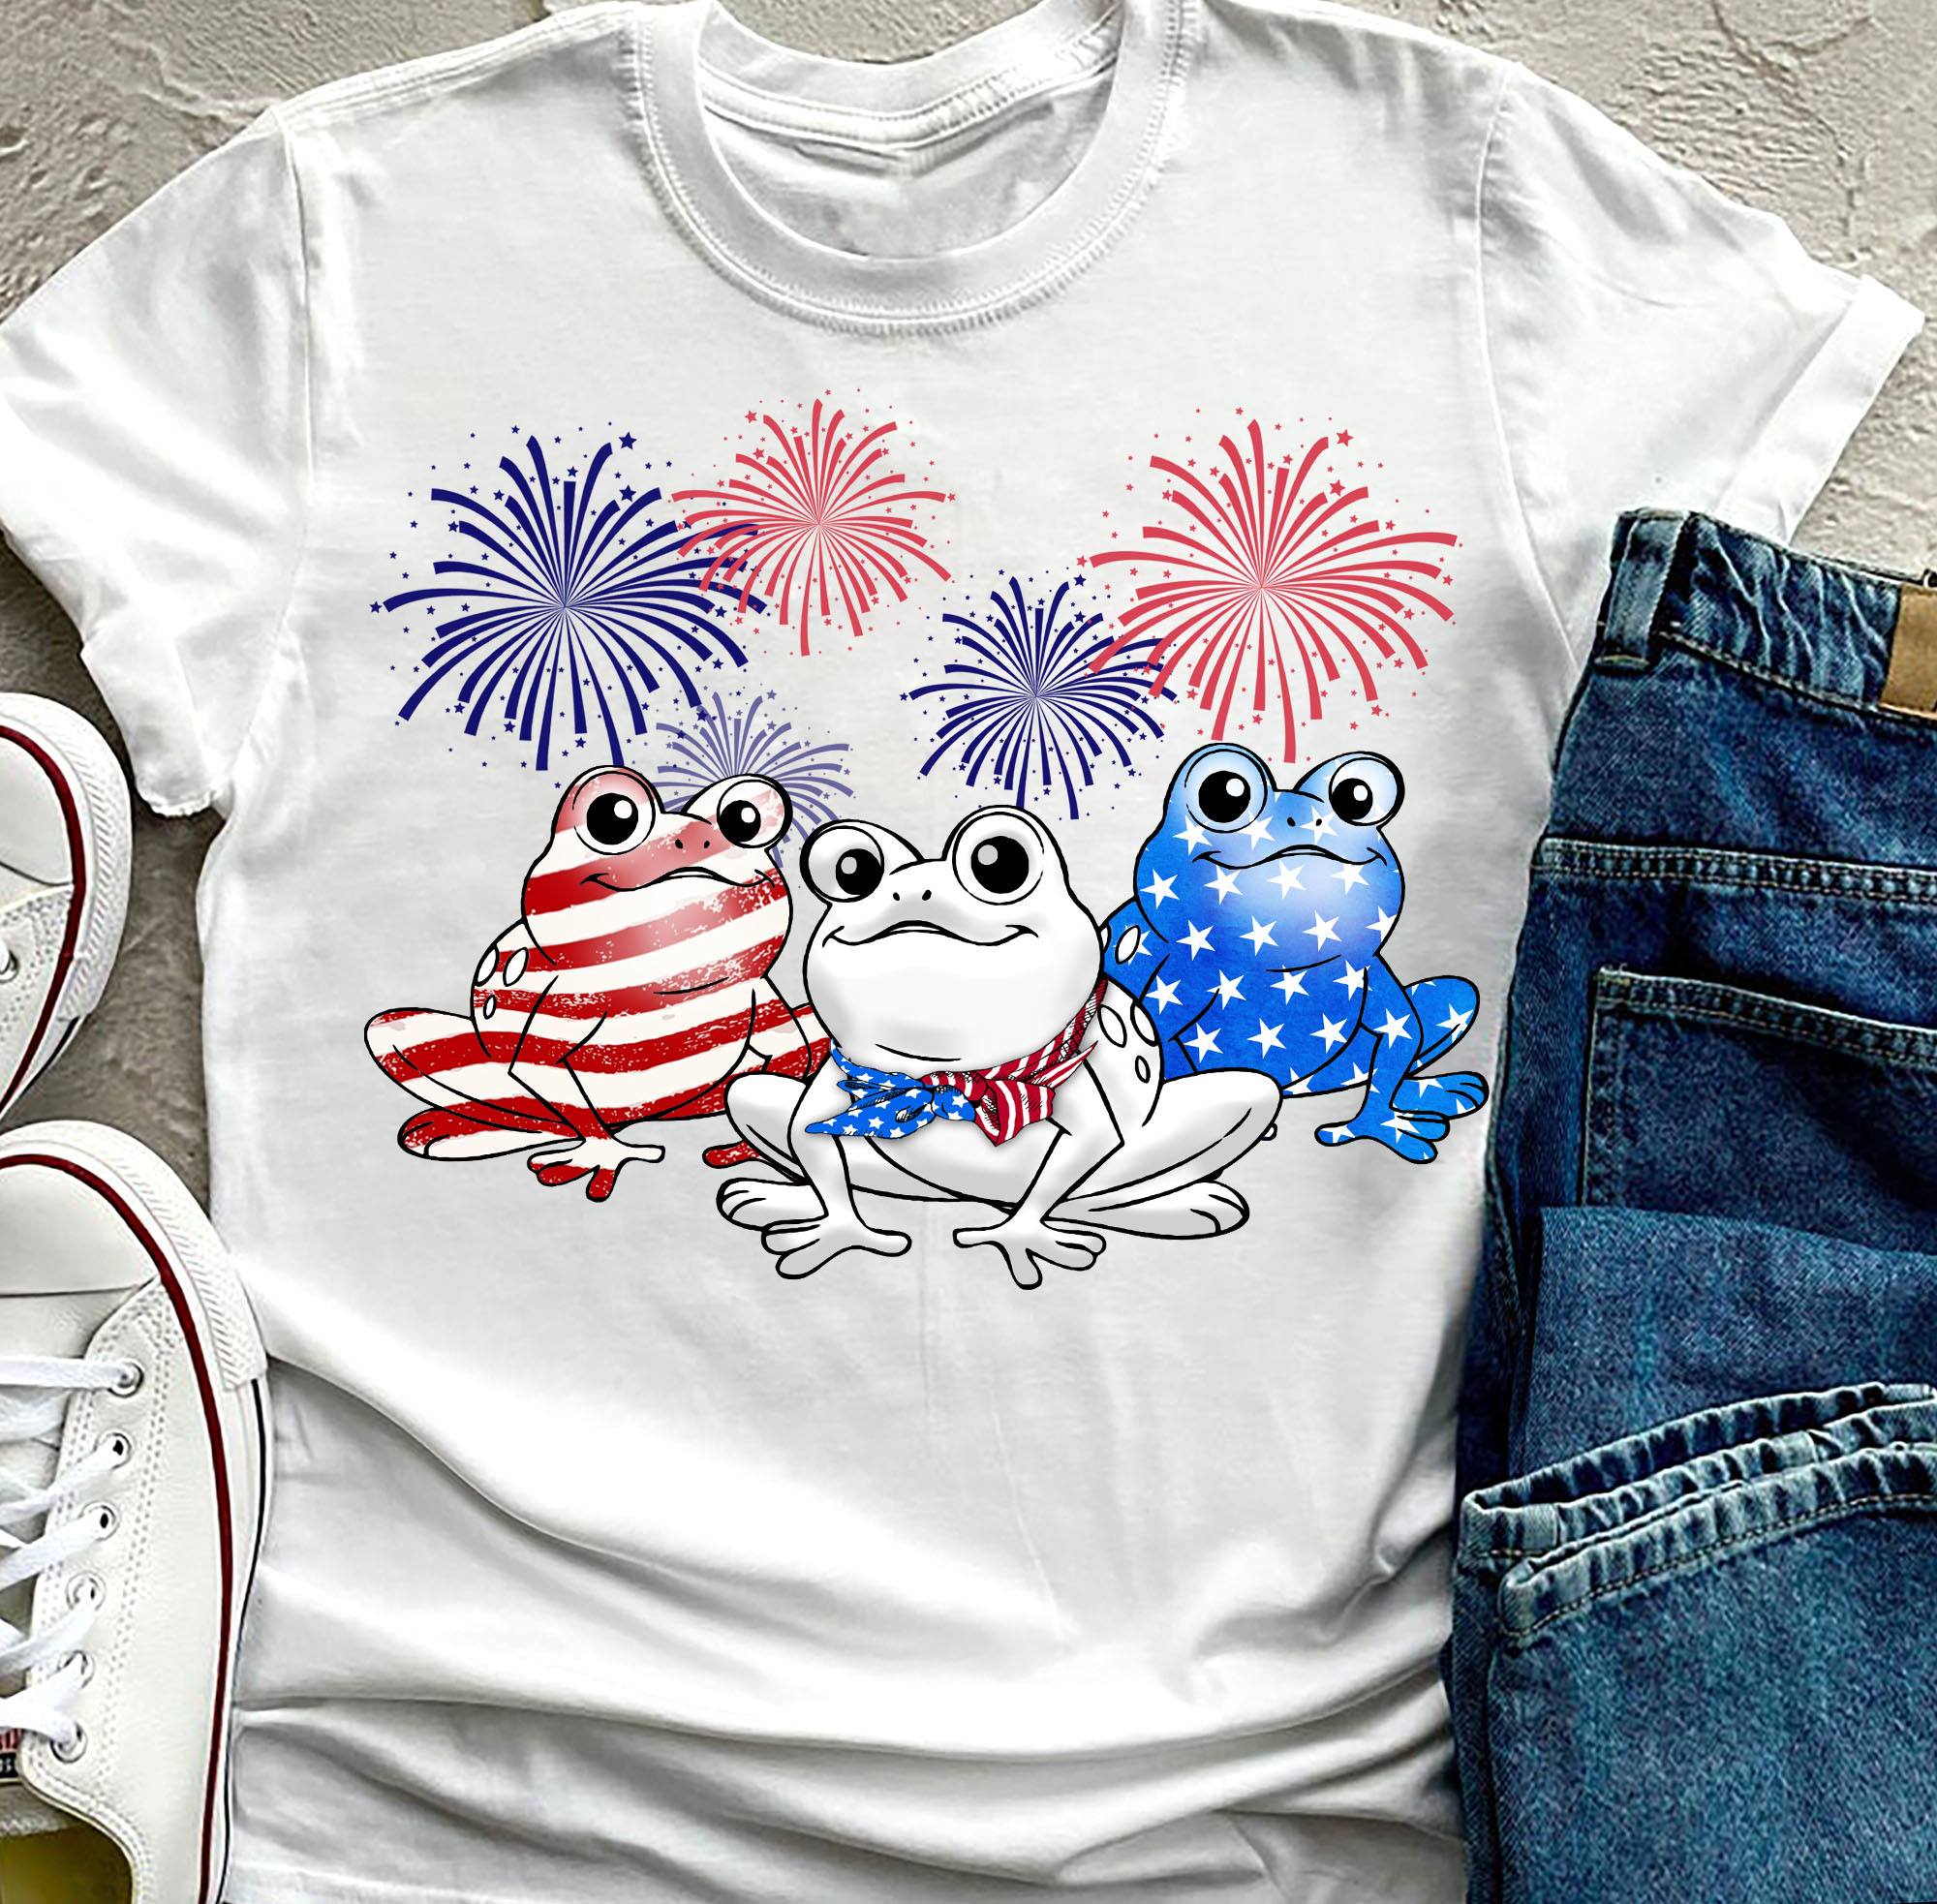 America flag and frog - Frog lover